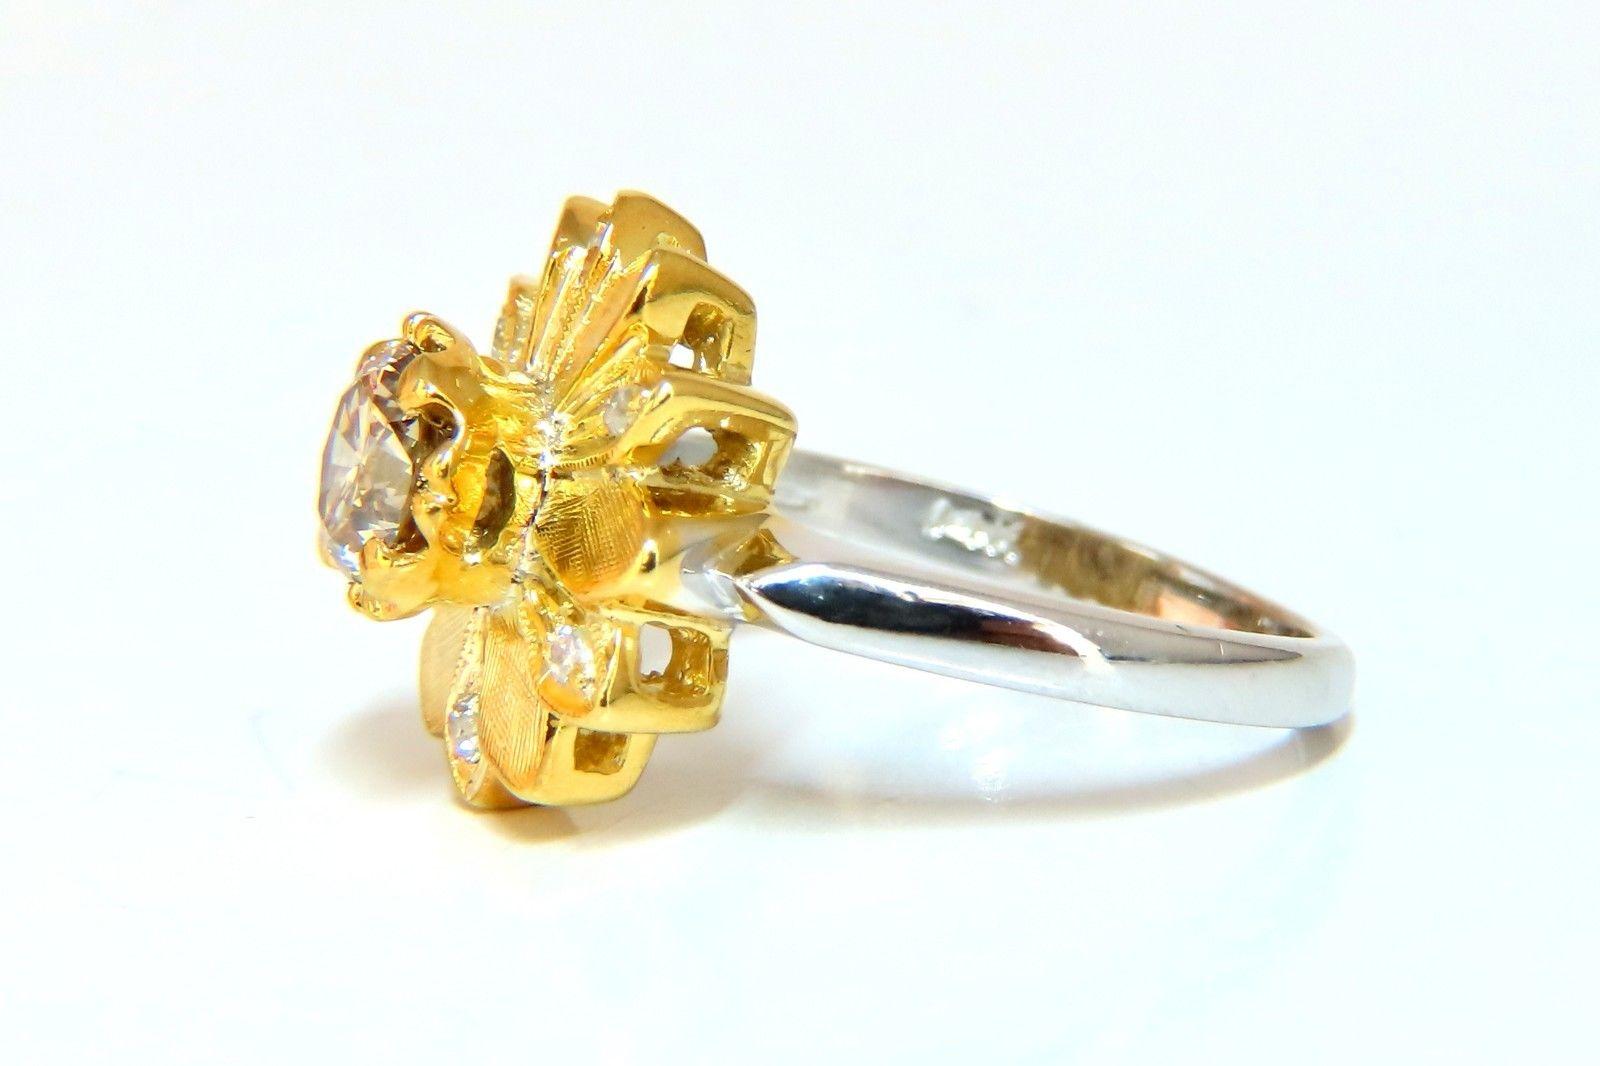 Petite Petals & Blossom

.63ct. Natural Fancy Orange brown round brilliant diamond ring.

Vs-2 clarity and full cut.

Side diamonds: .10ct. 

H-color, Vs-2 clarity.

14kt. white & yellow  gold

Top deck: 14 mm wide 

Depth: 7.0mm

4.2